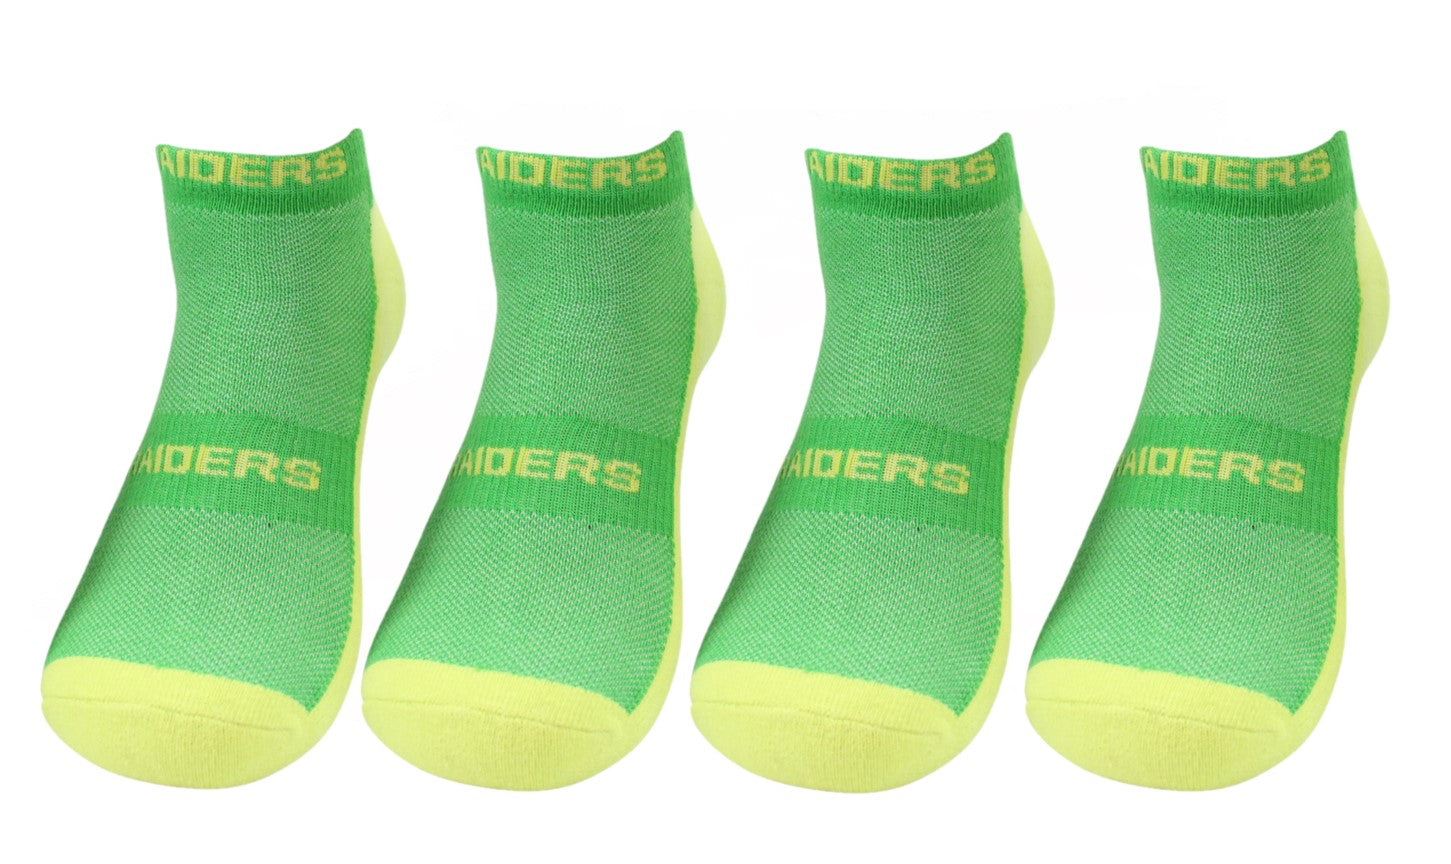 NRL Canberra Raiders 4 Pairs High Performance Ankle Sports Socks